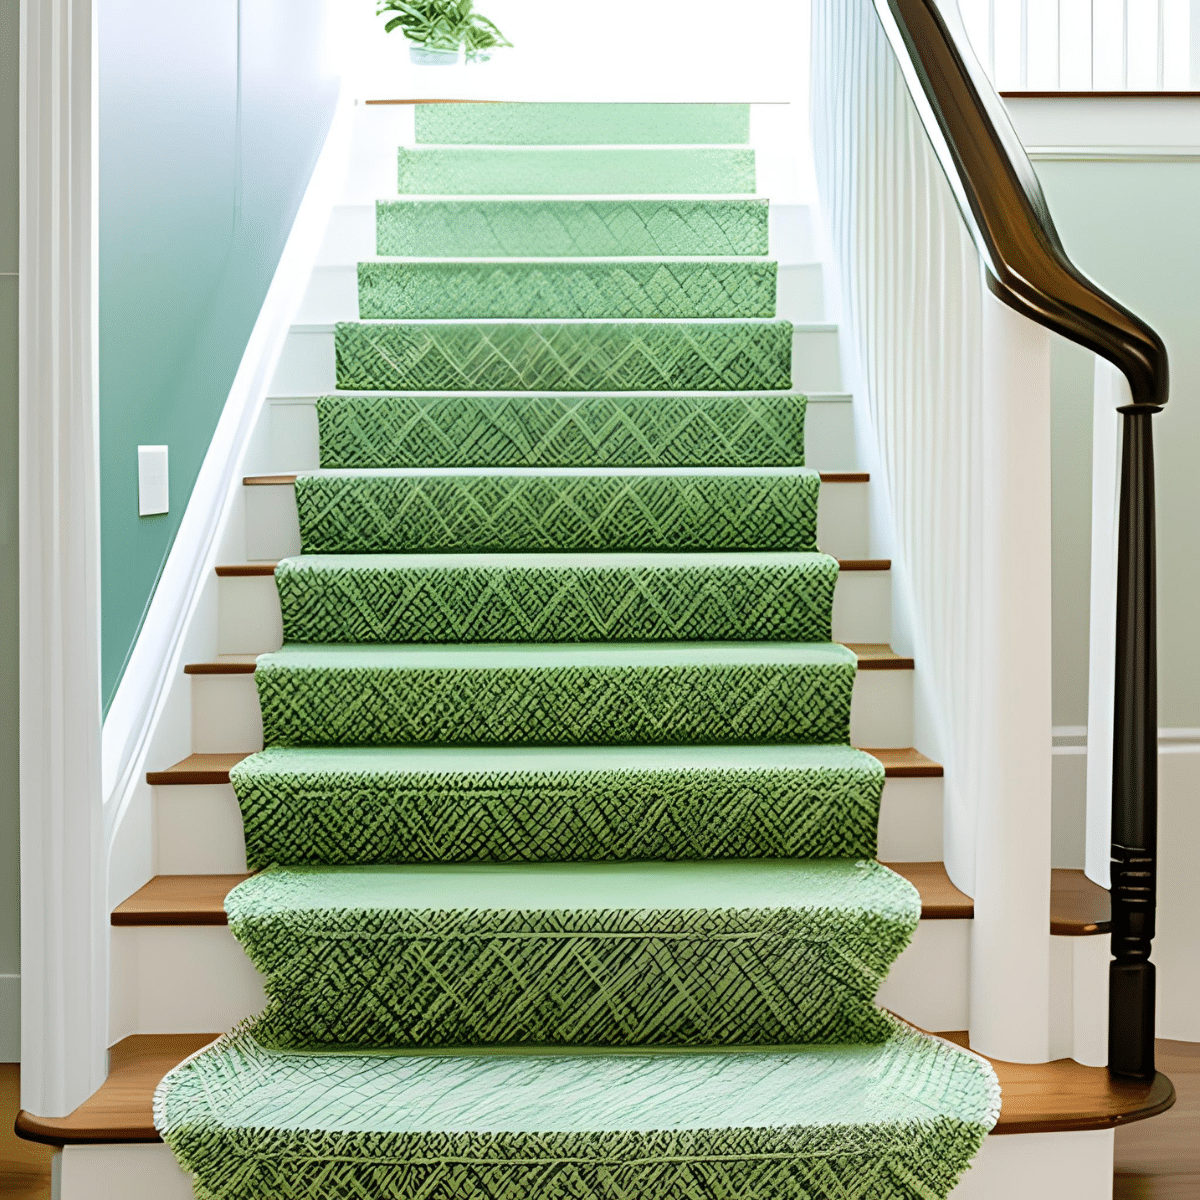 white staircase with a subtle green patterned runner